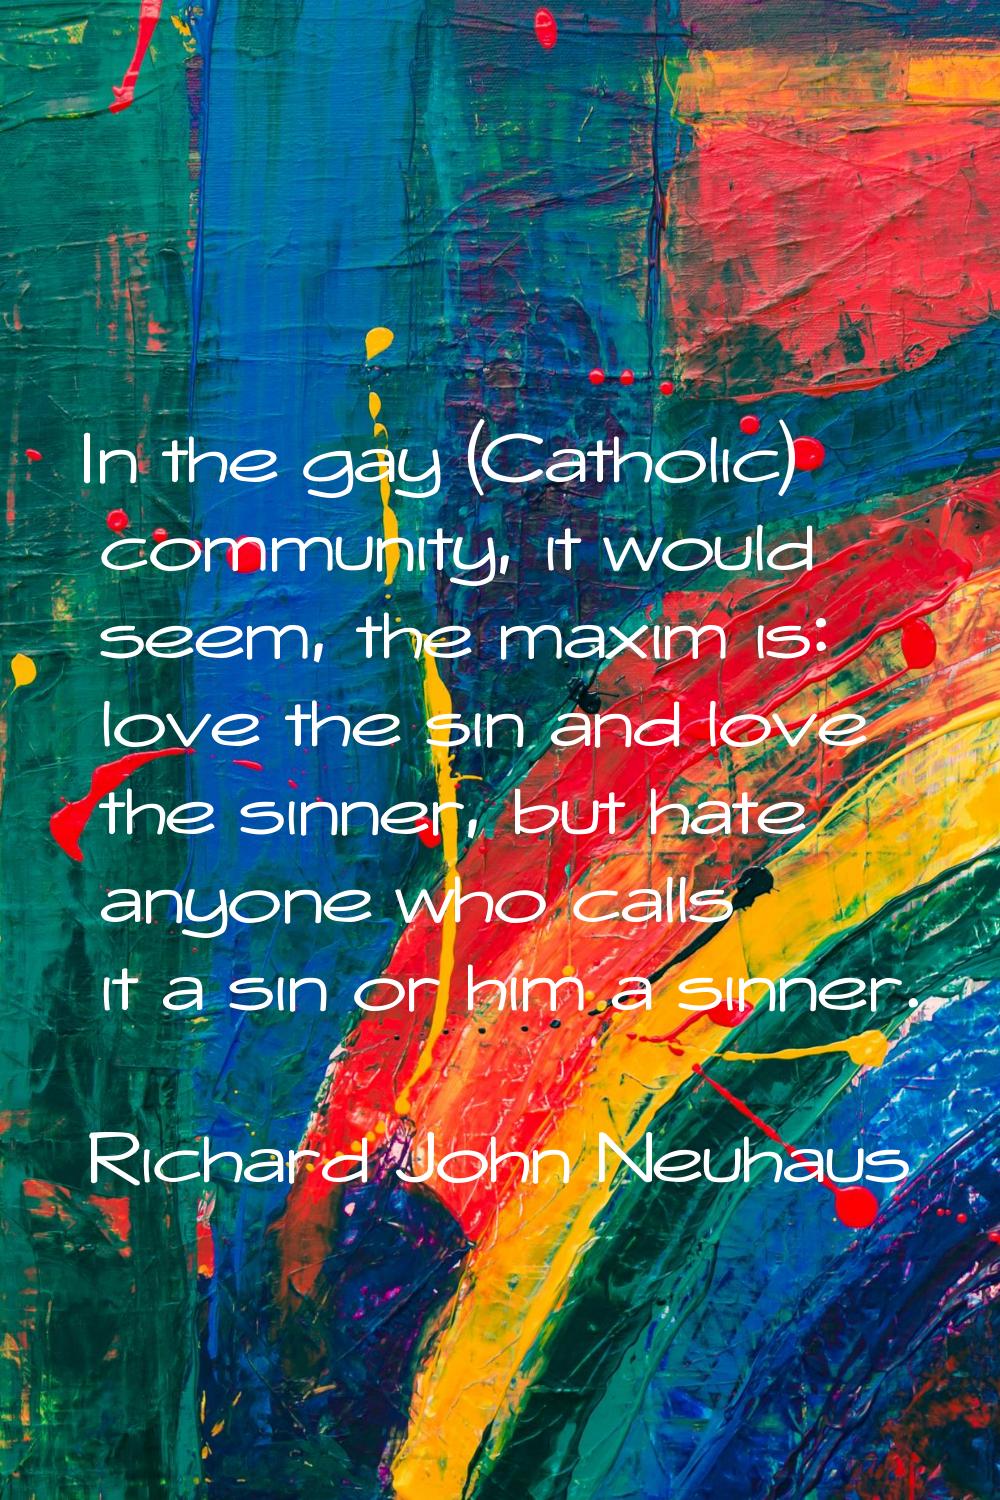 In the gay (Catholic) community, it would seem, the maxim is: love the sin and love the sinner, but